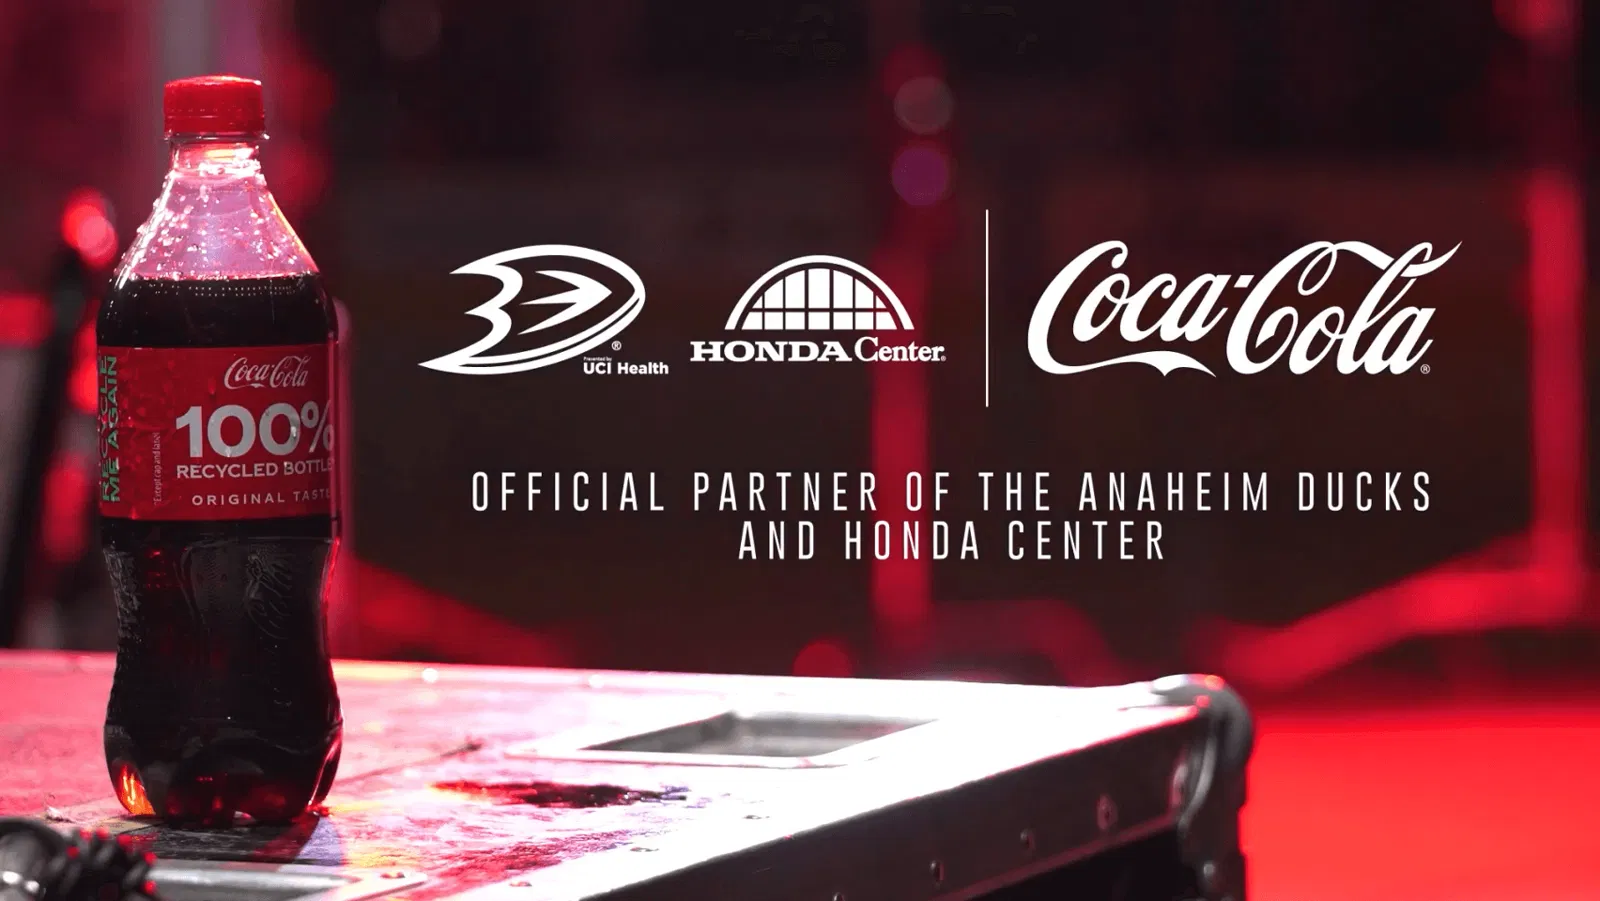 The Coca-Cola banner about the official partnership with the Anaheim Ducks and the Honda Center